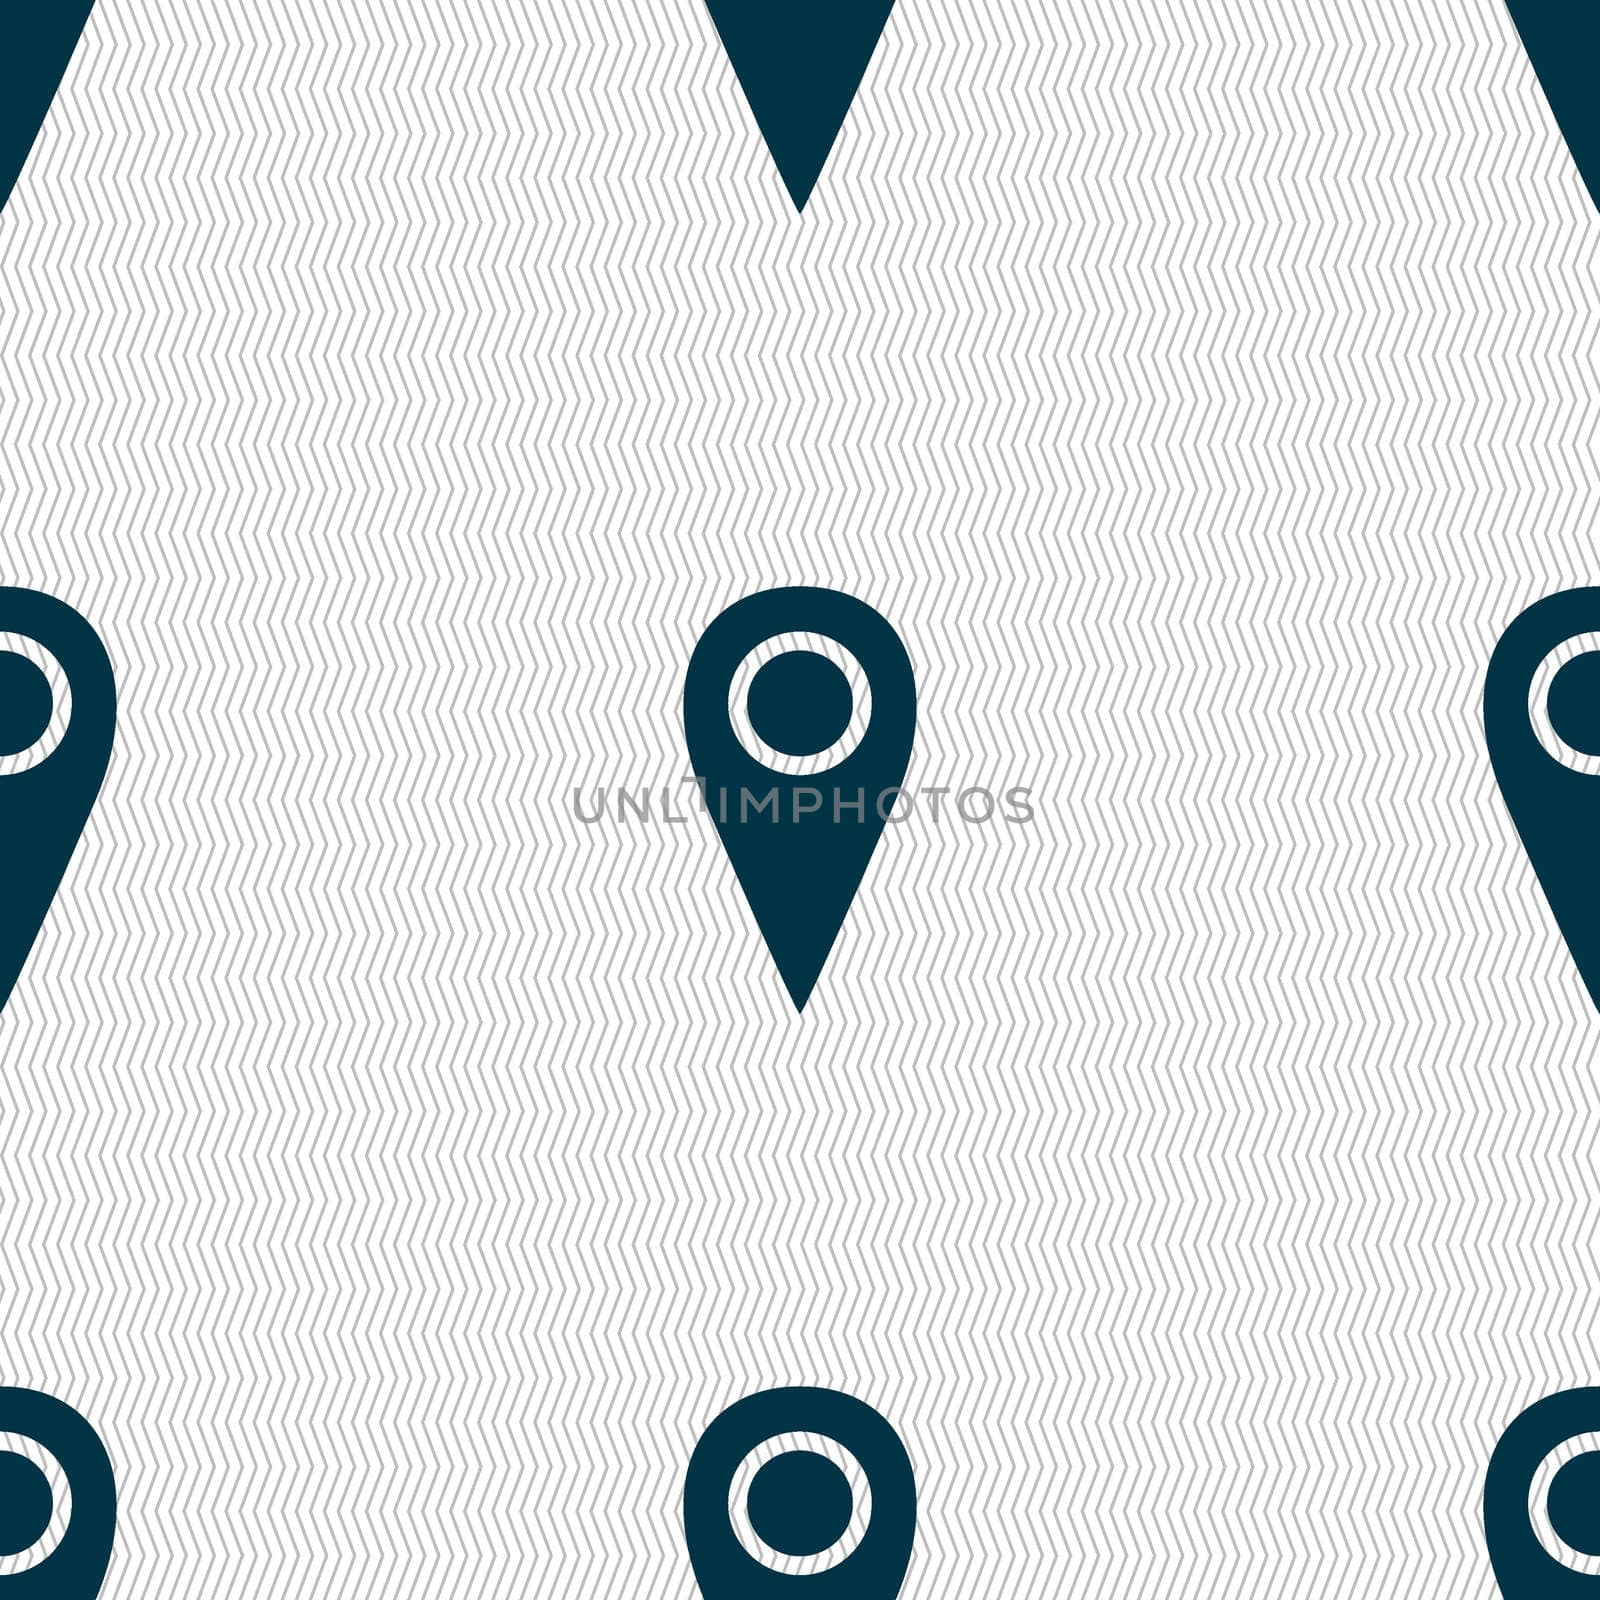 Map pointer icon sign. Seamless abstract background with geometric shapes. illustration